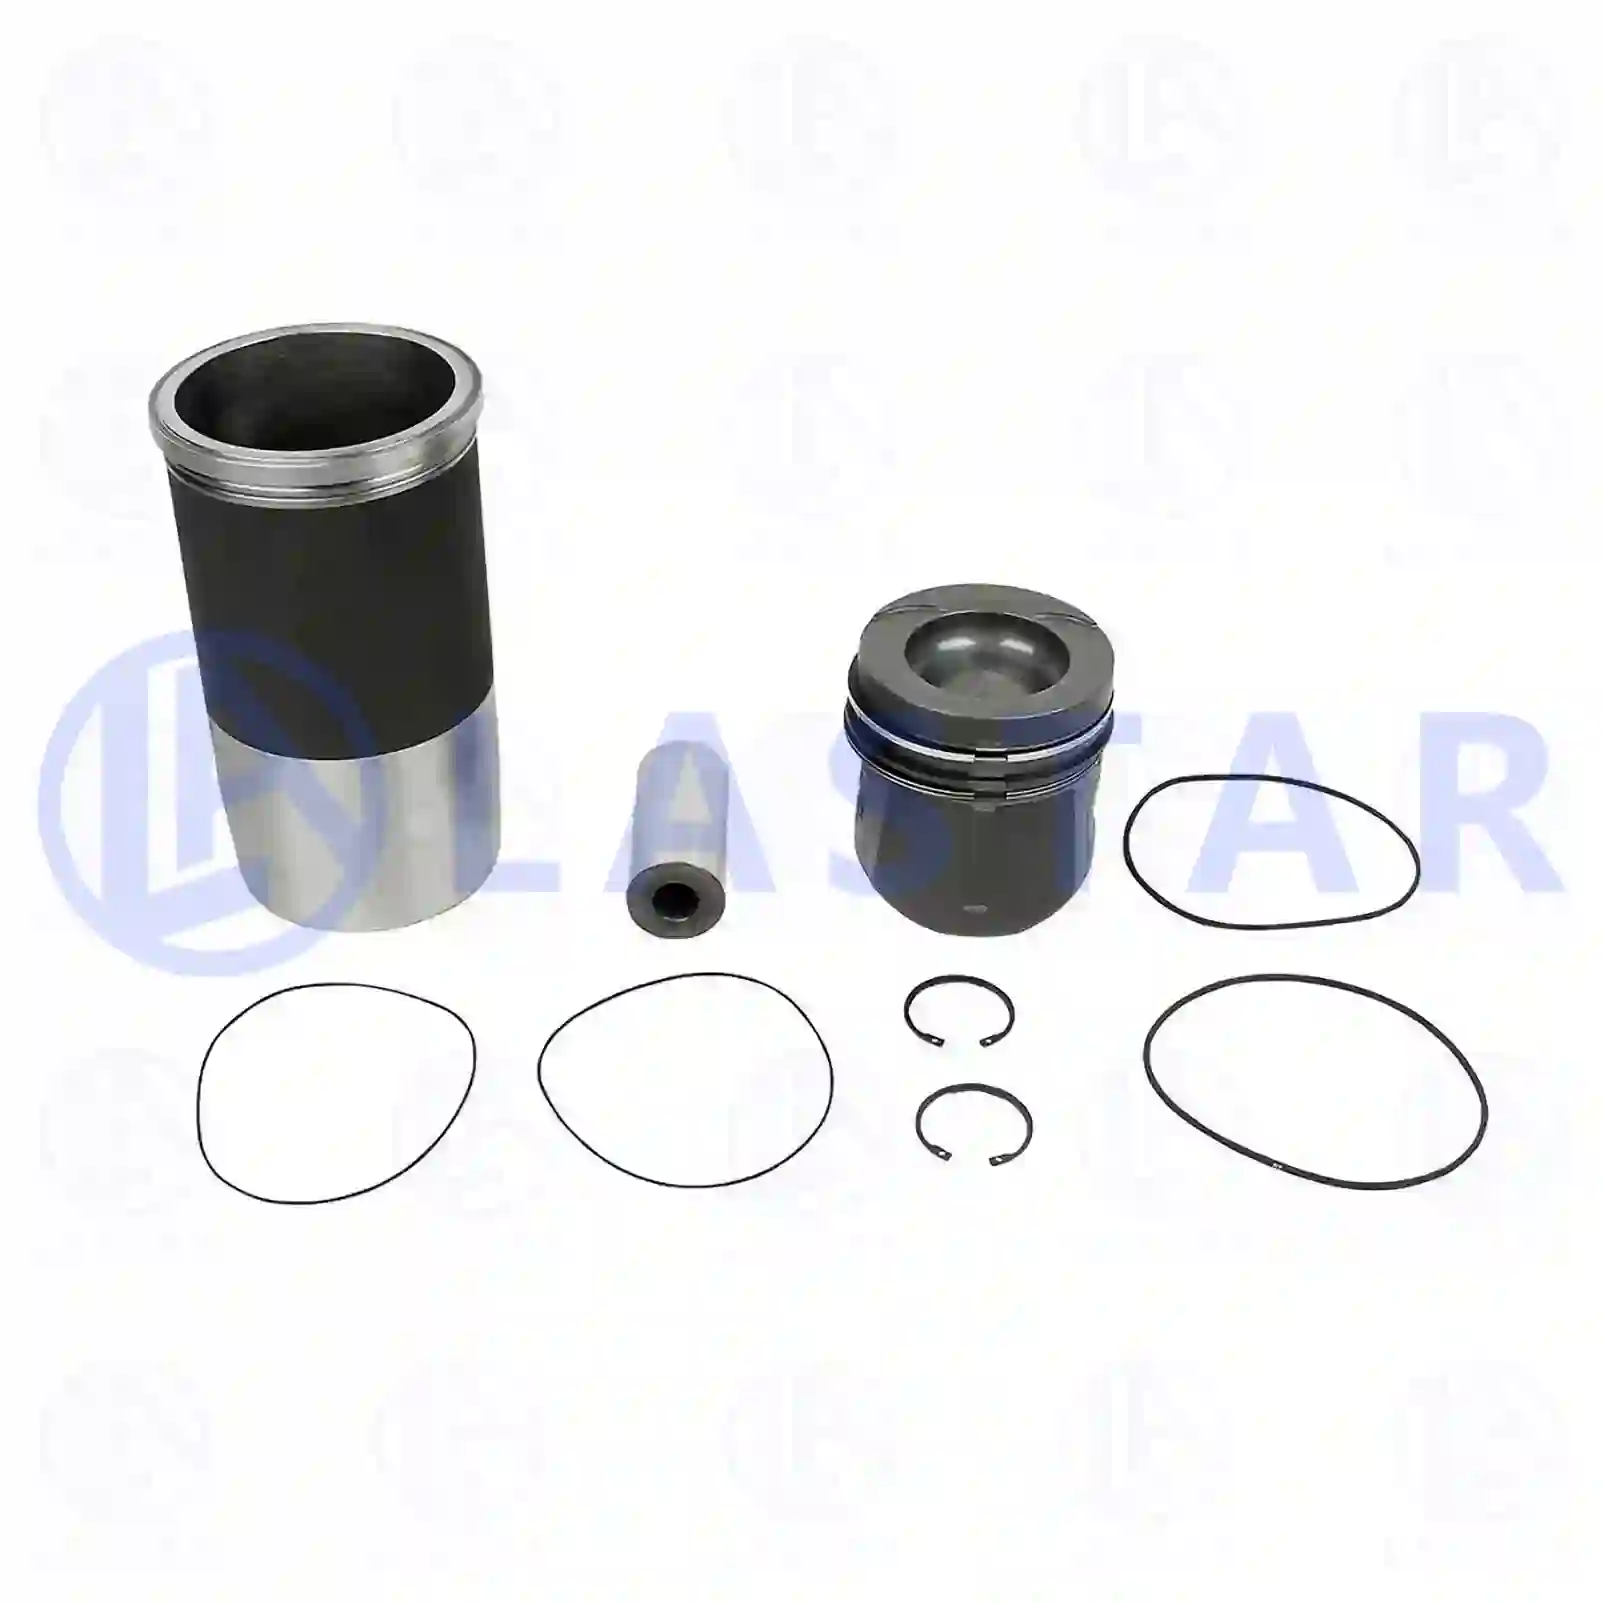 Piston with liner, 77701041, 51025117262S ||  77701041 Lastar Spare Part | Truck Spare Parts, Auotomotive Spare Parts Piston with liner, 77701041, 51025117262S ||  77701041 Lastar Spare Part | Truck Spare Parts, Auotomotive Spare Parts